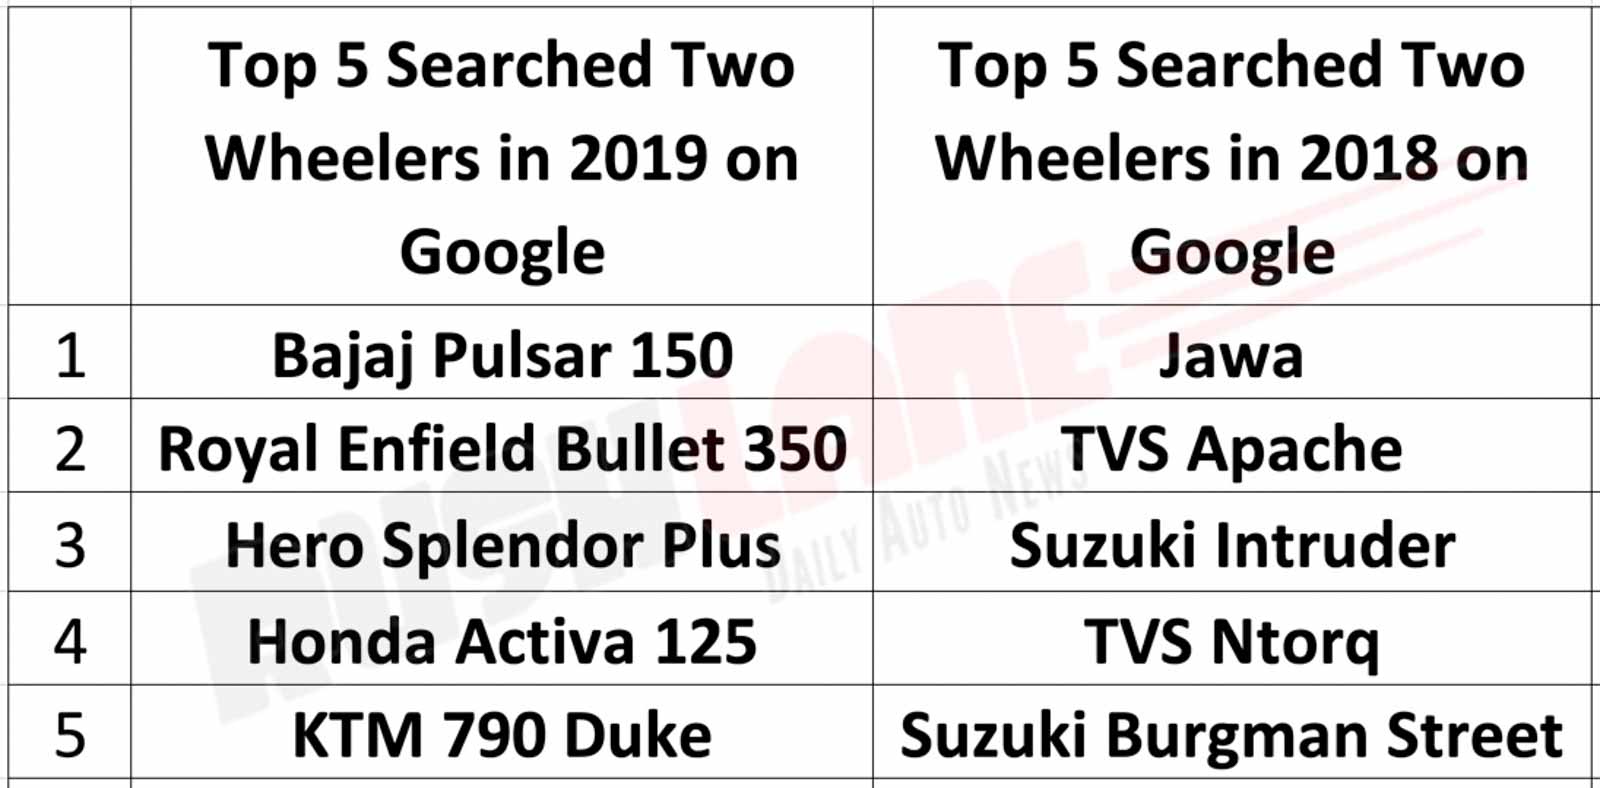 Most searched bikes in 2019 vs Most searched bikes in 2018. None of the bikes from 2018 featured in the 2019 list.